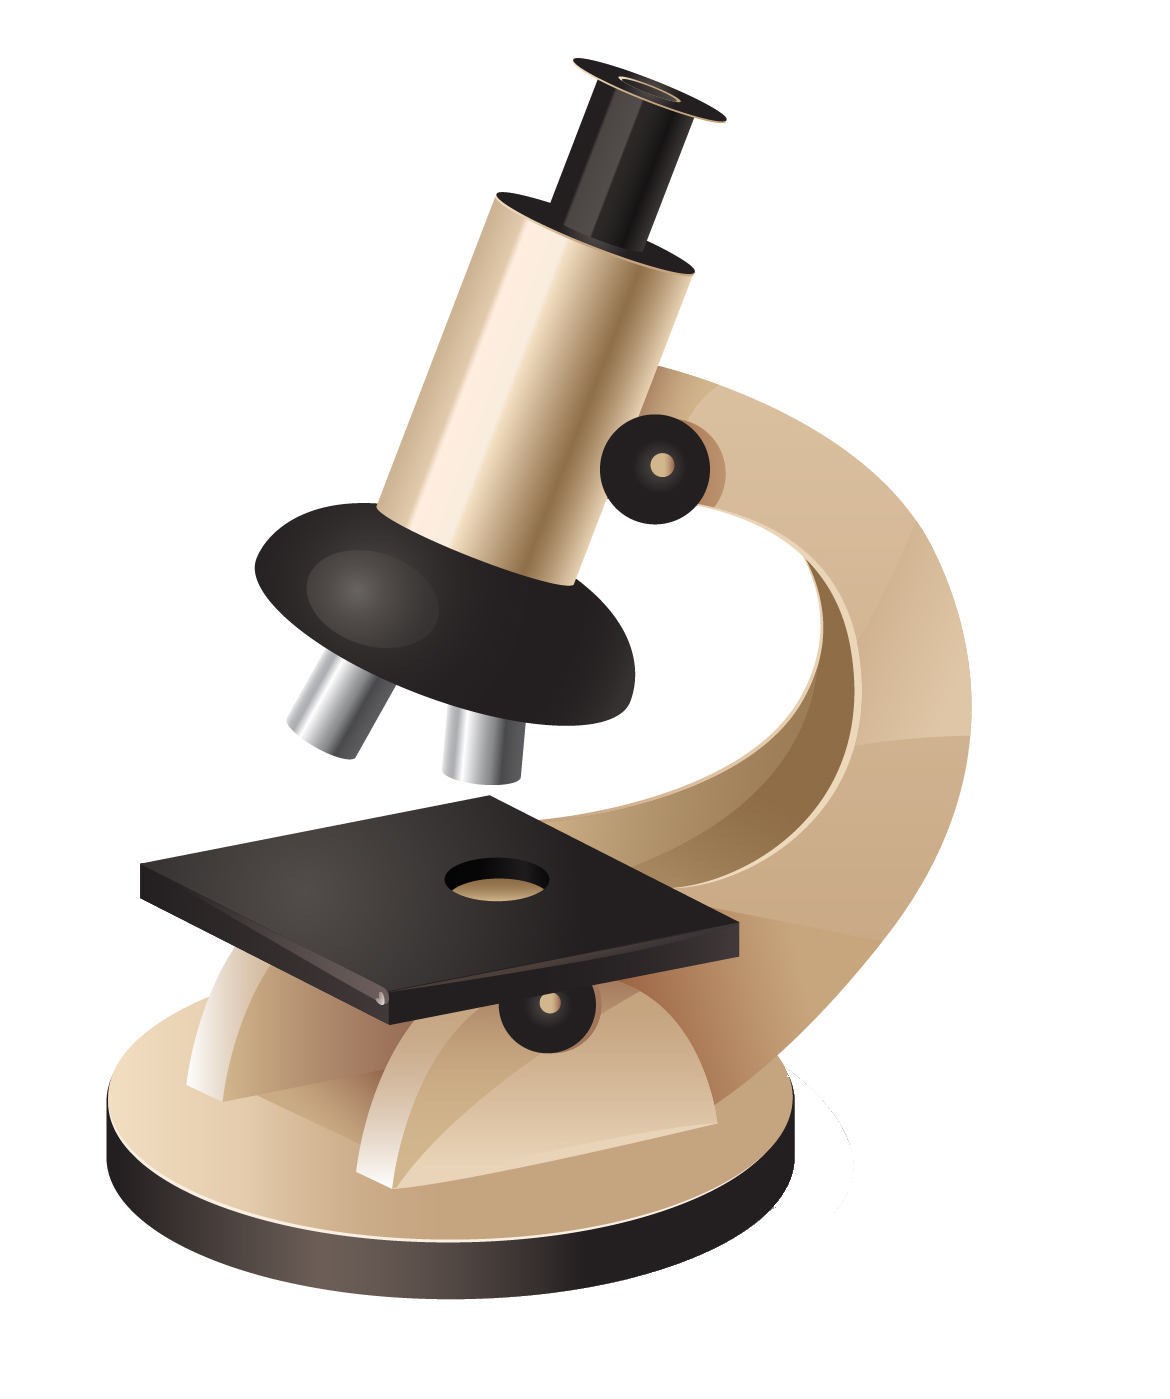 microscope clipart practical